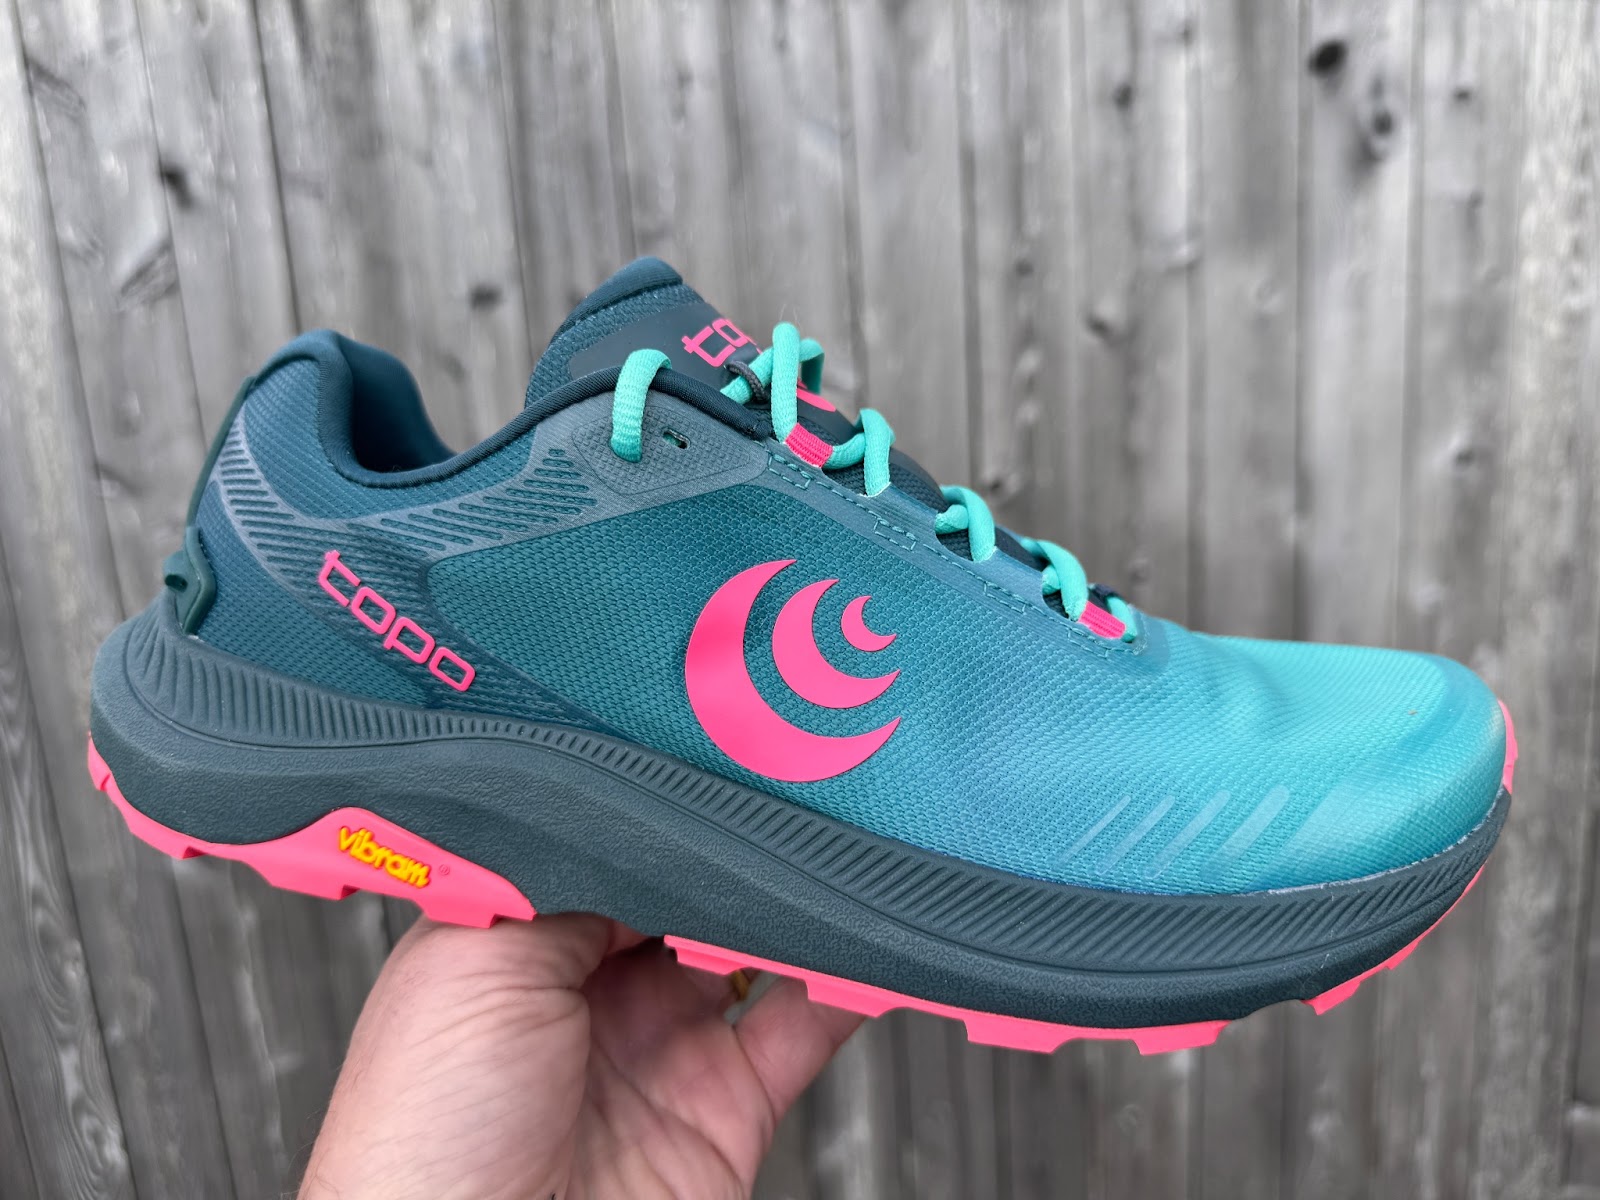 Road Trail Run: RoadTrailRun's Top TRAIL Running Shoes of 2022 Awards:  Multiple Categories, Most Smiles, Biggest Surprises, Innovations & Top Brand-  16 Contributors more than 11,000 Test Miles!